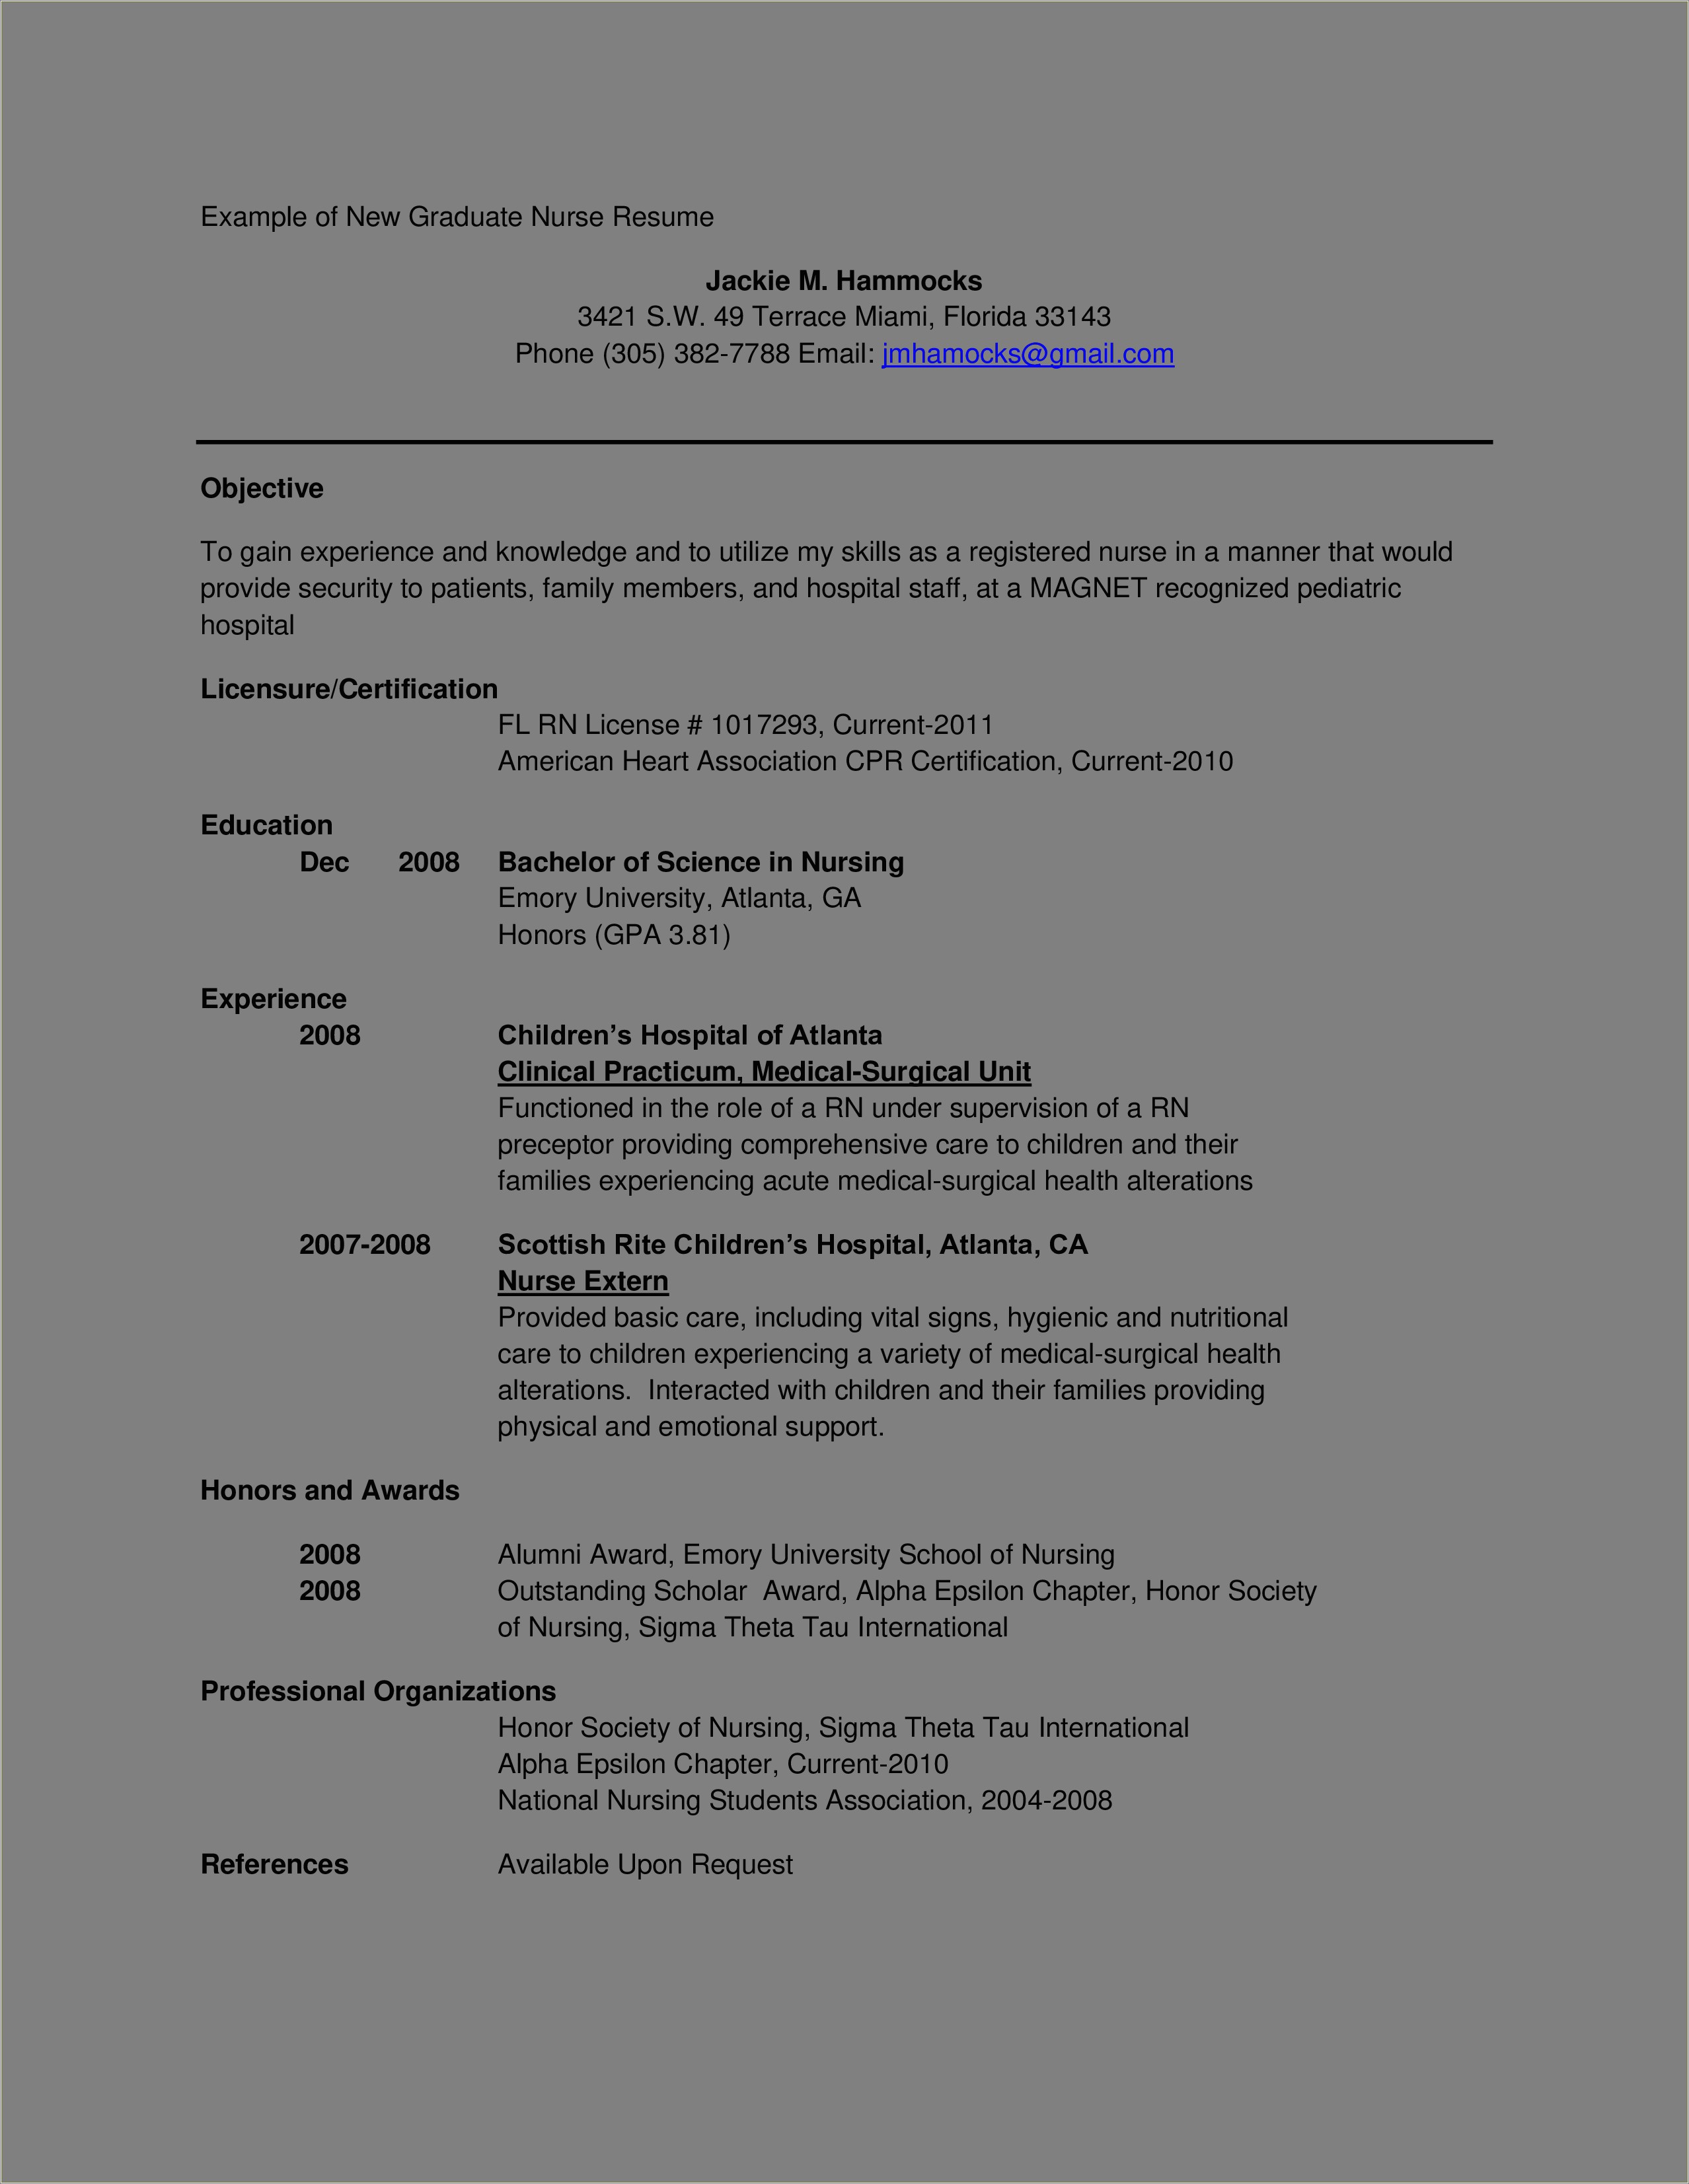 Resume Sample For A New Rn